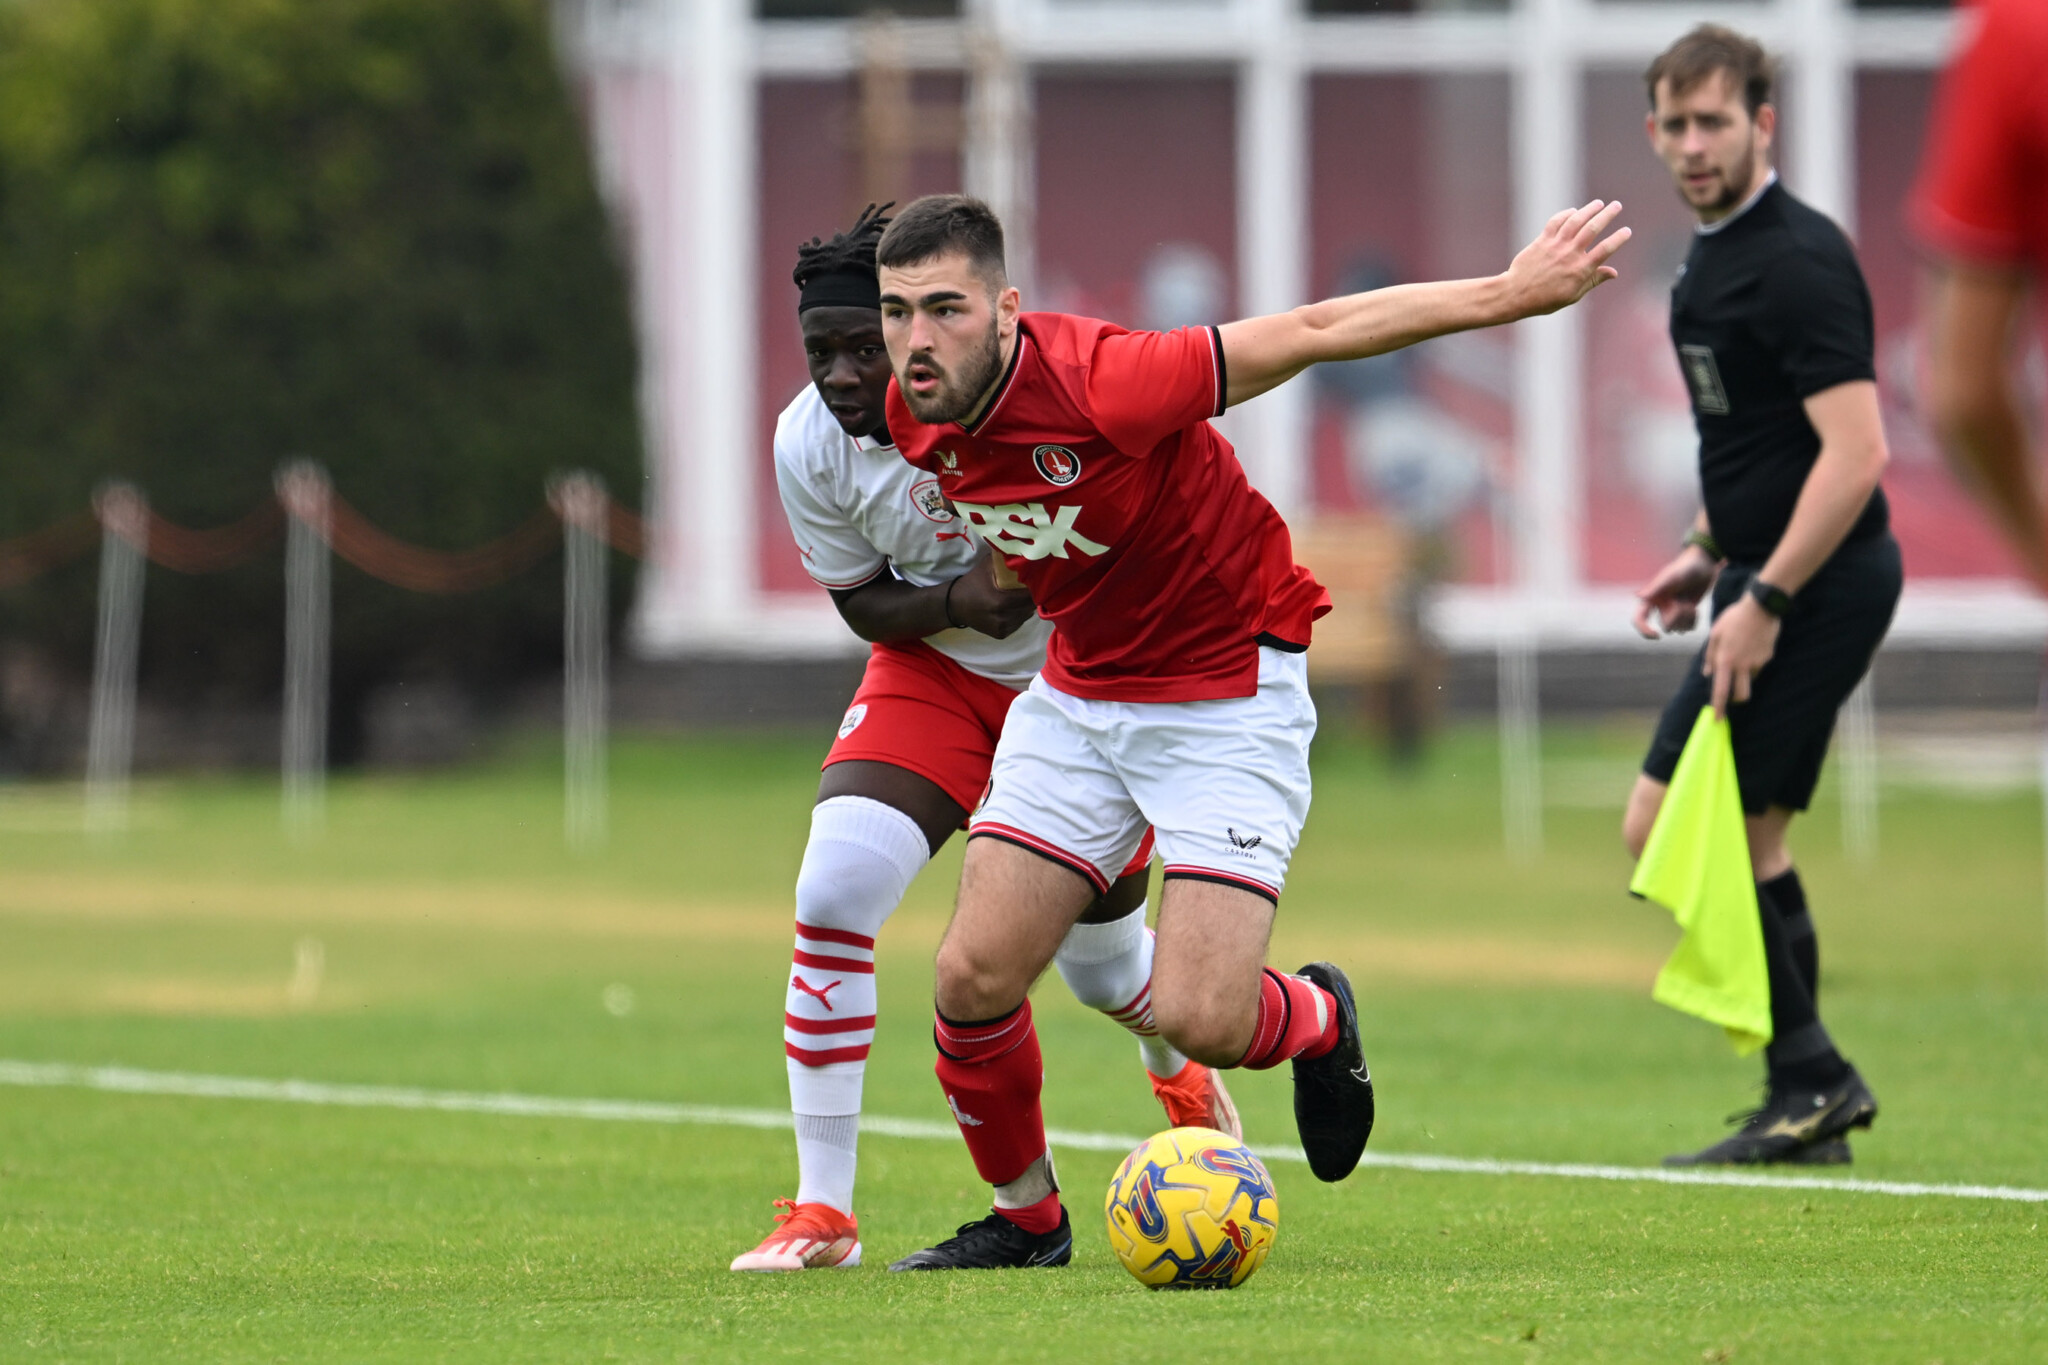 Young Charlton Athletic centre-back signs first professional contract – South London News